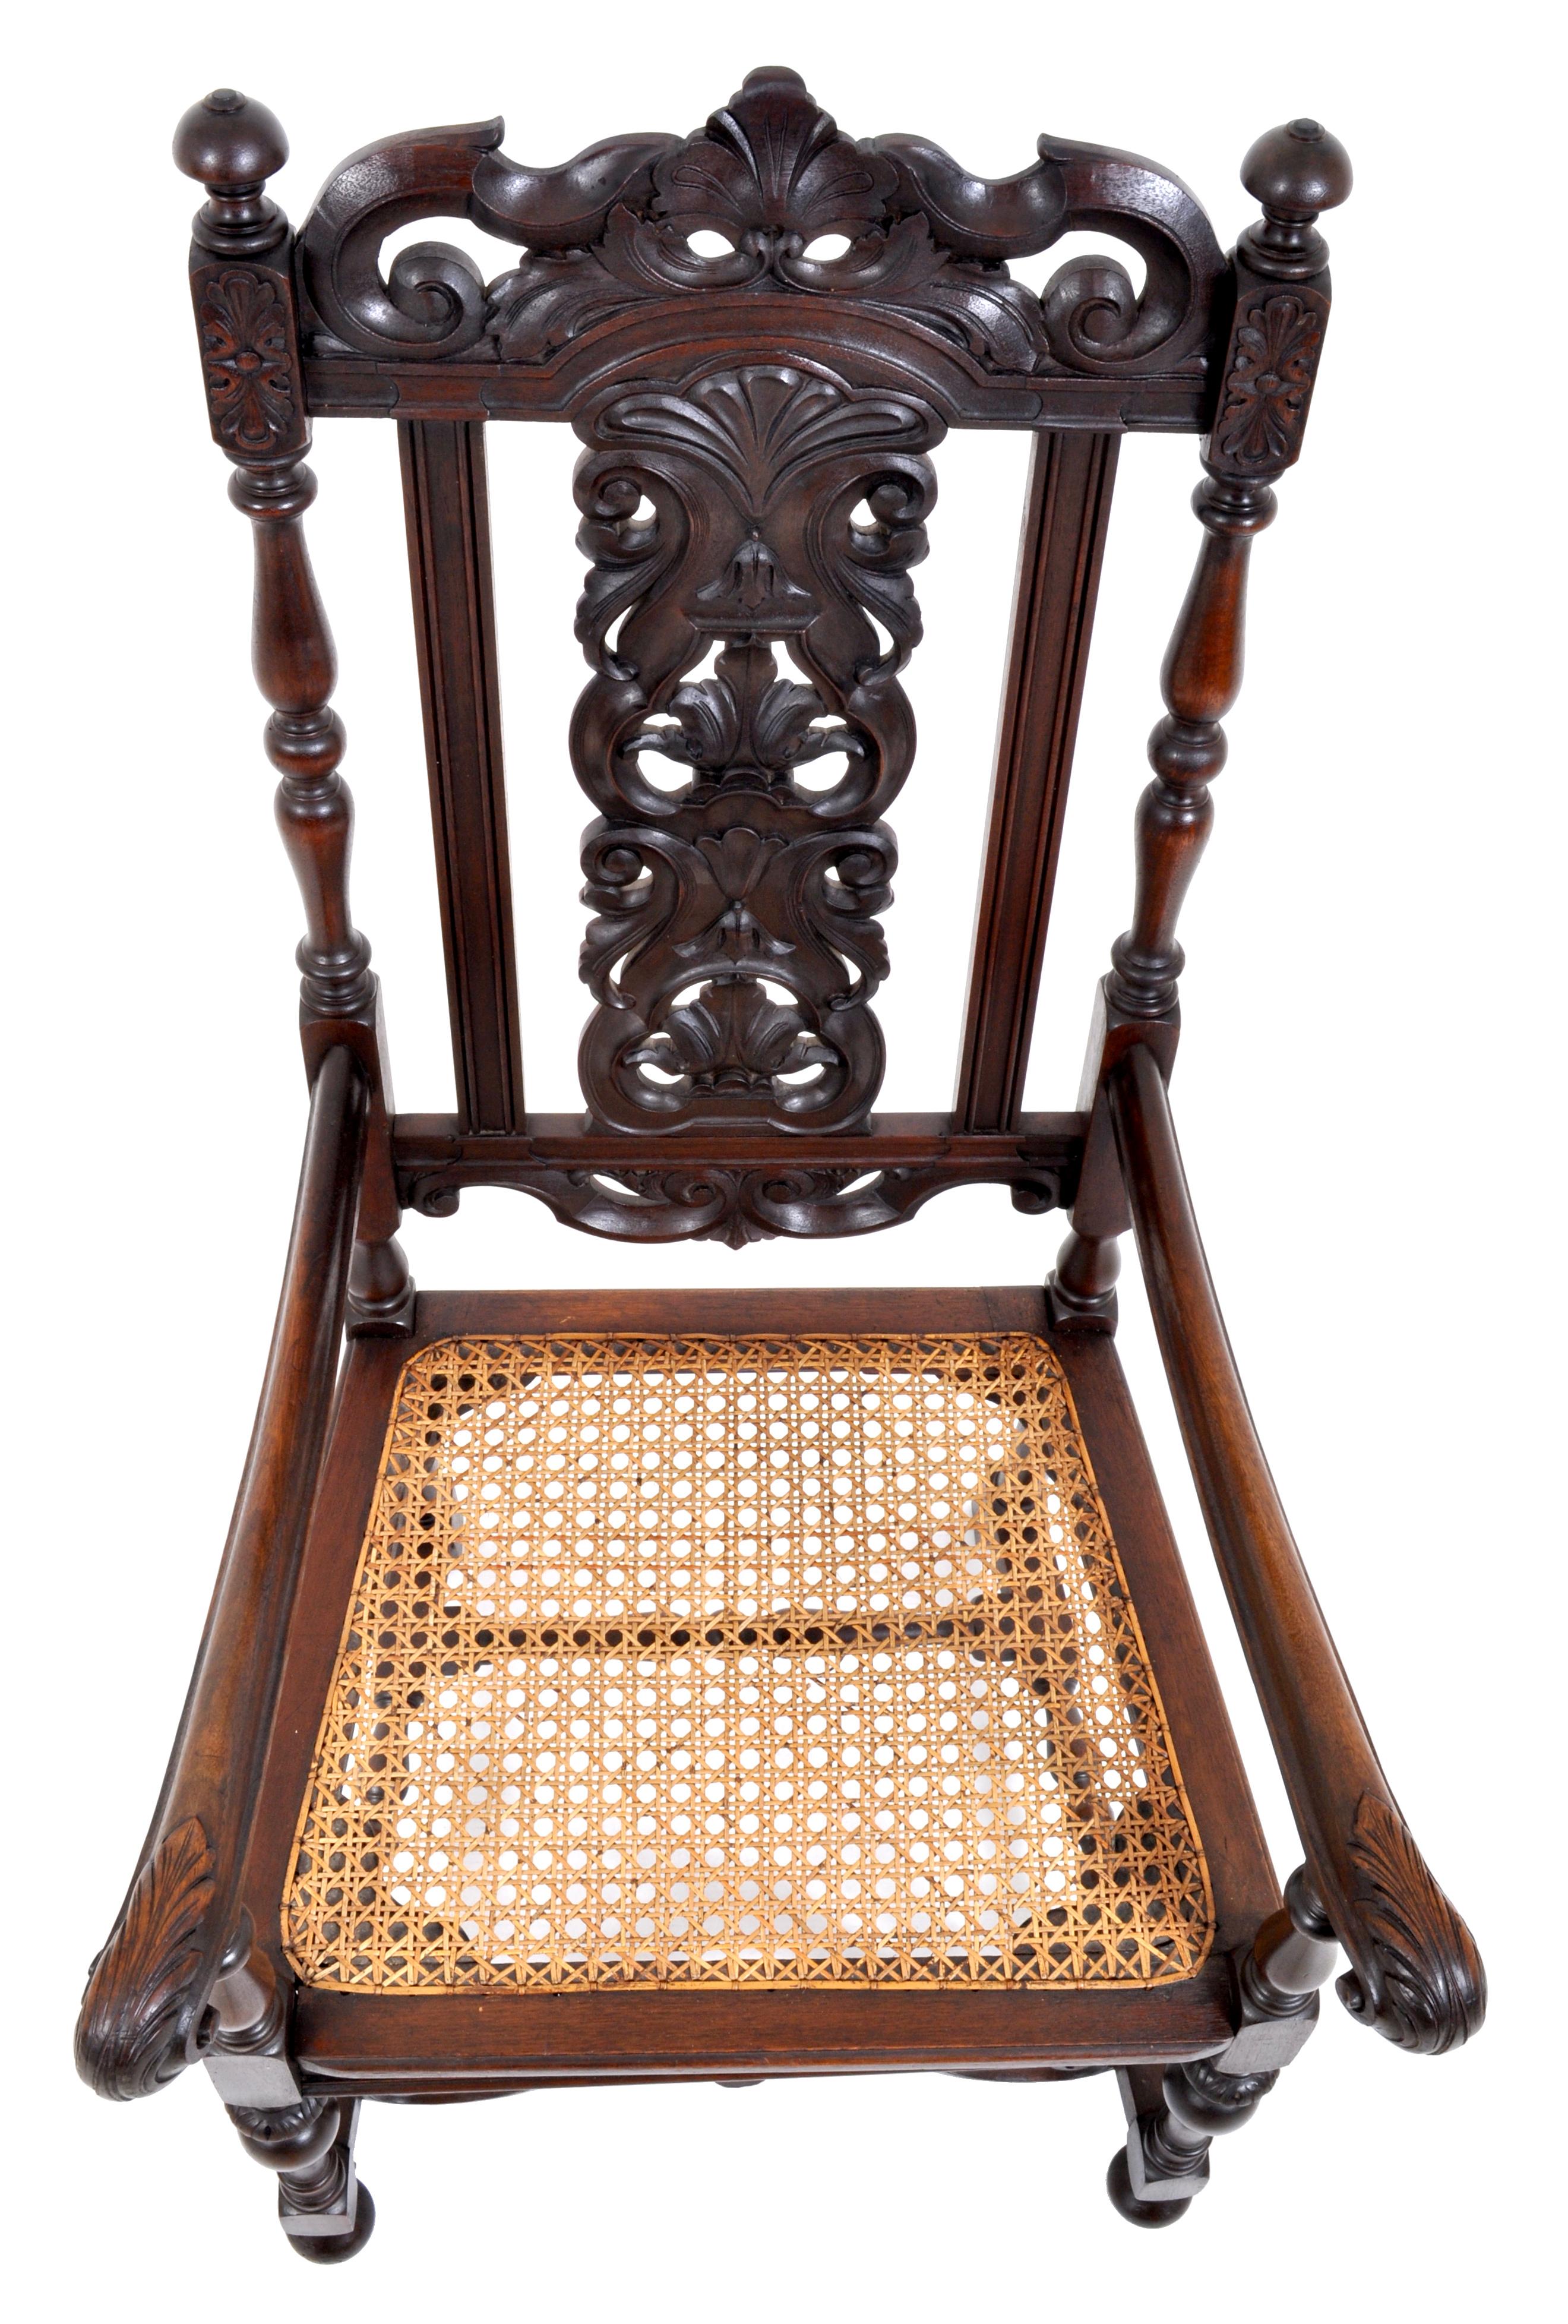 English Antique Baroque Carved Walnut Throne Chair, circa 1880 For Sale